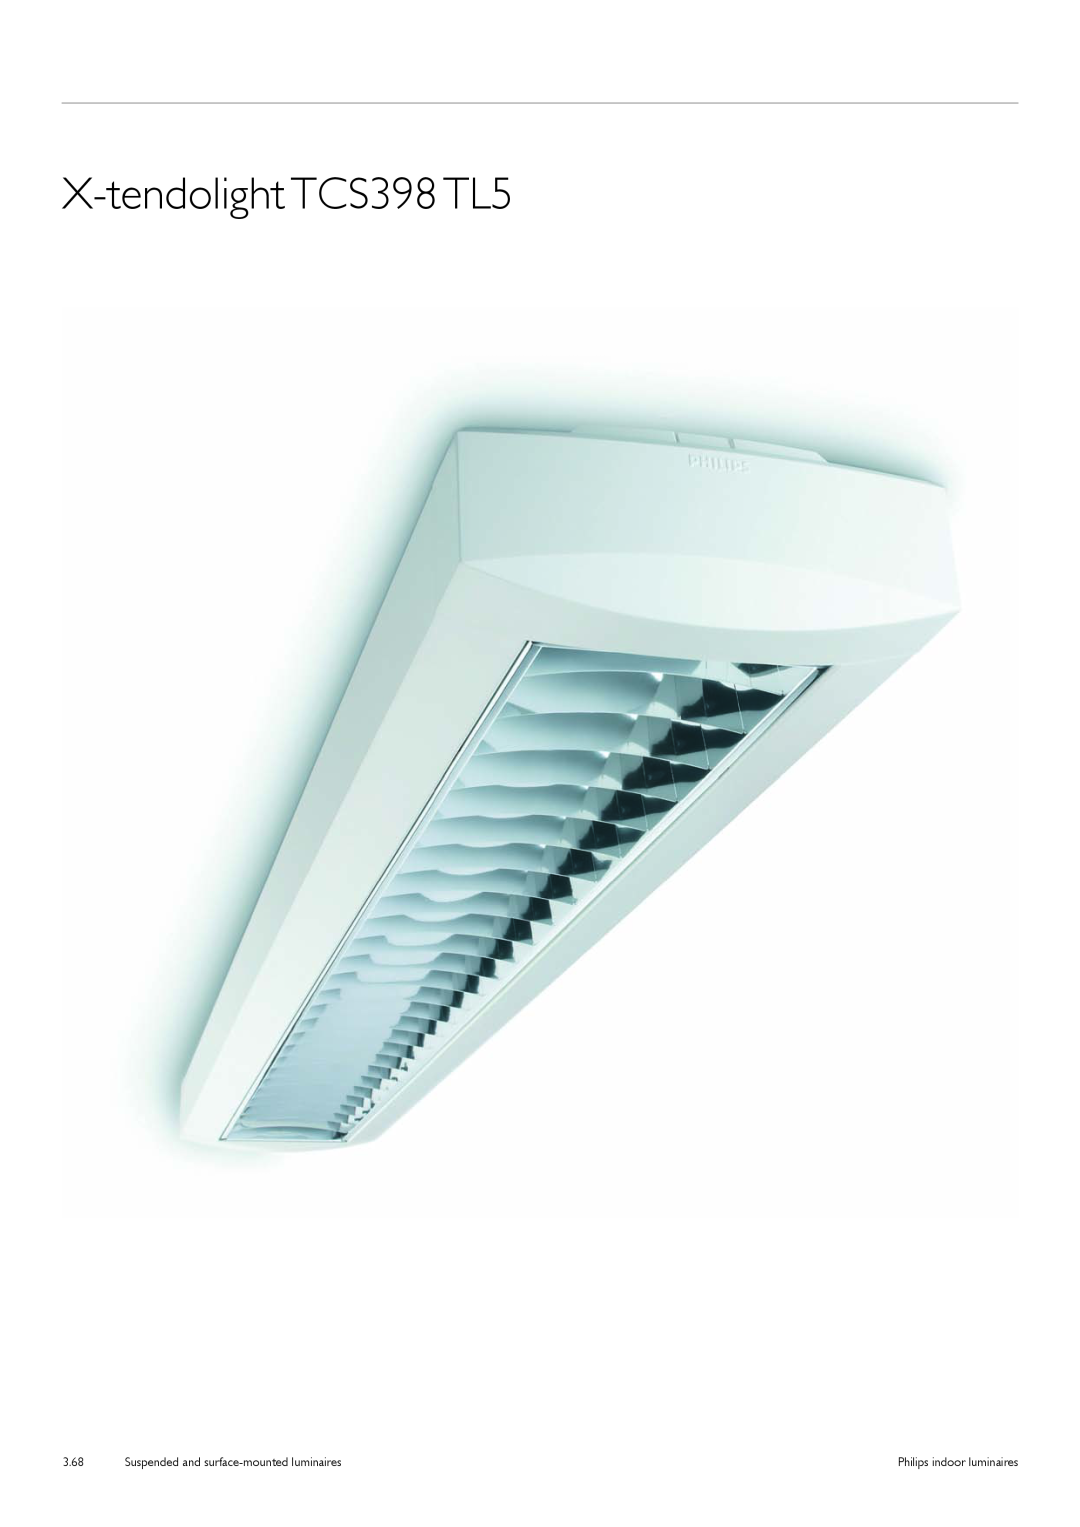 Philips TCS125 manual X-tendolightTCS398 TL5, Suspended and surface-mountedluminaires, 3.68, Philips indoor luminaires 